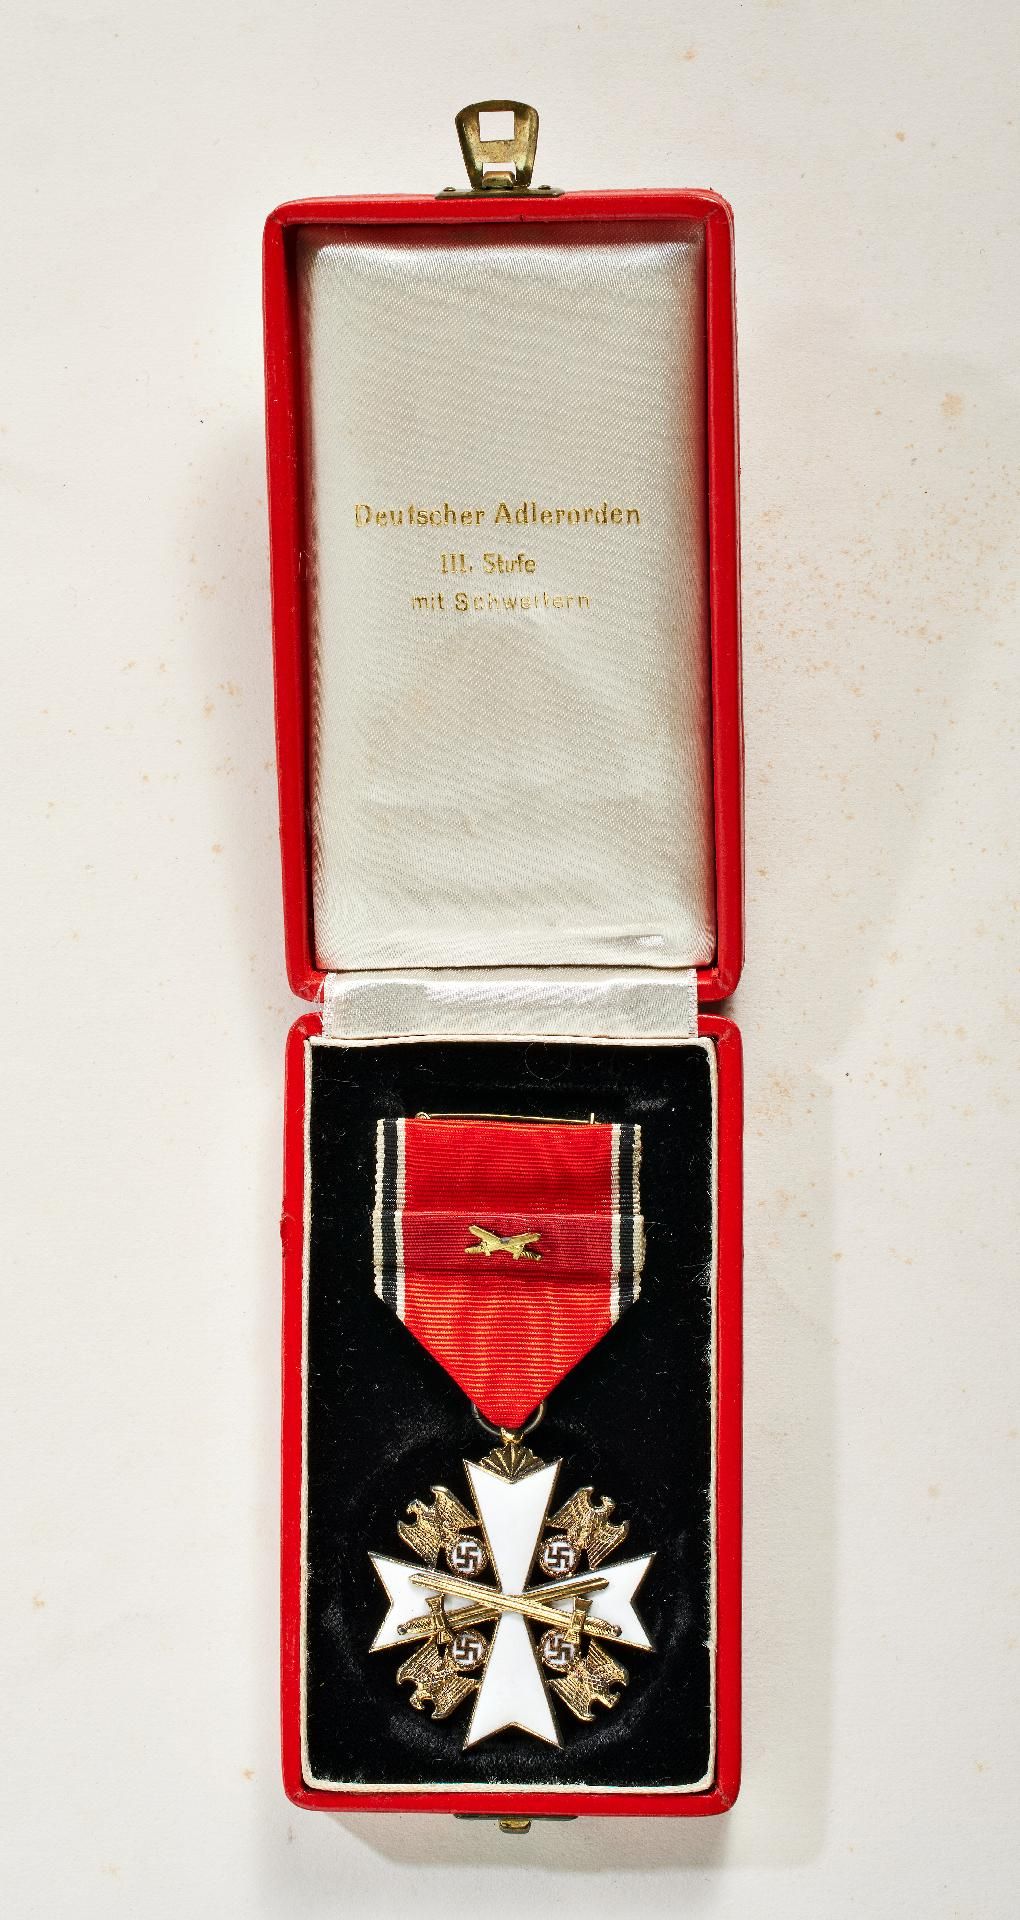 German Eagle Order : Order of the German Eagle: Cross of Merit III. level (5th class) with sword...